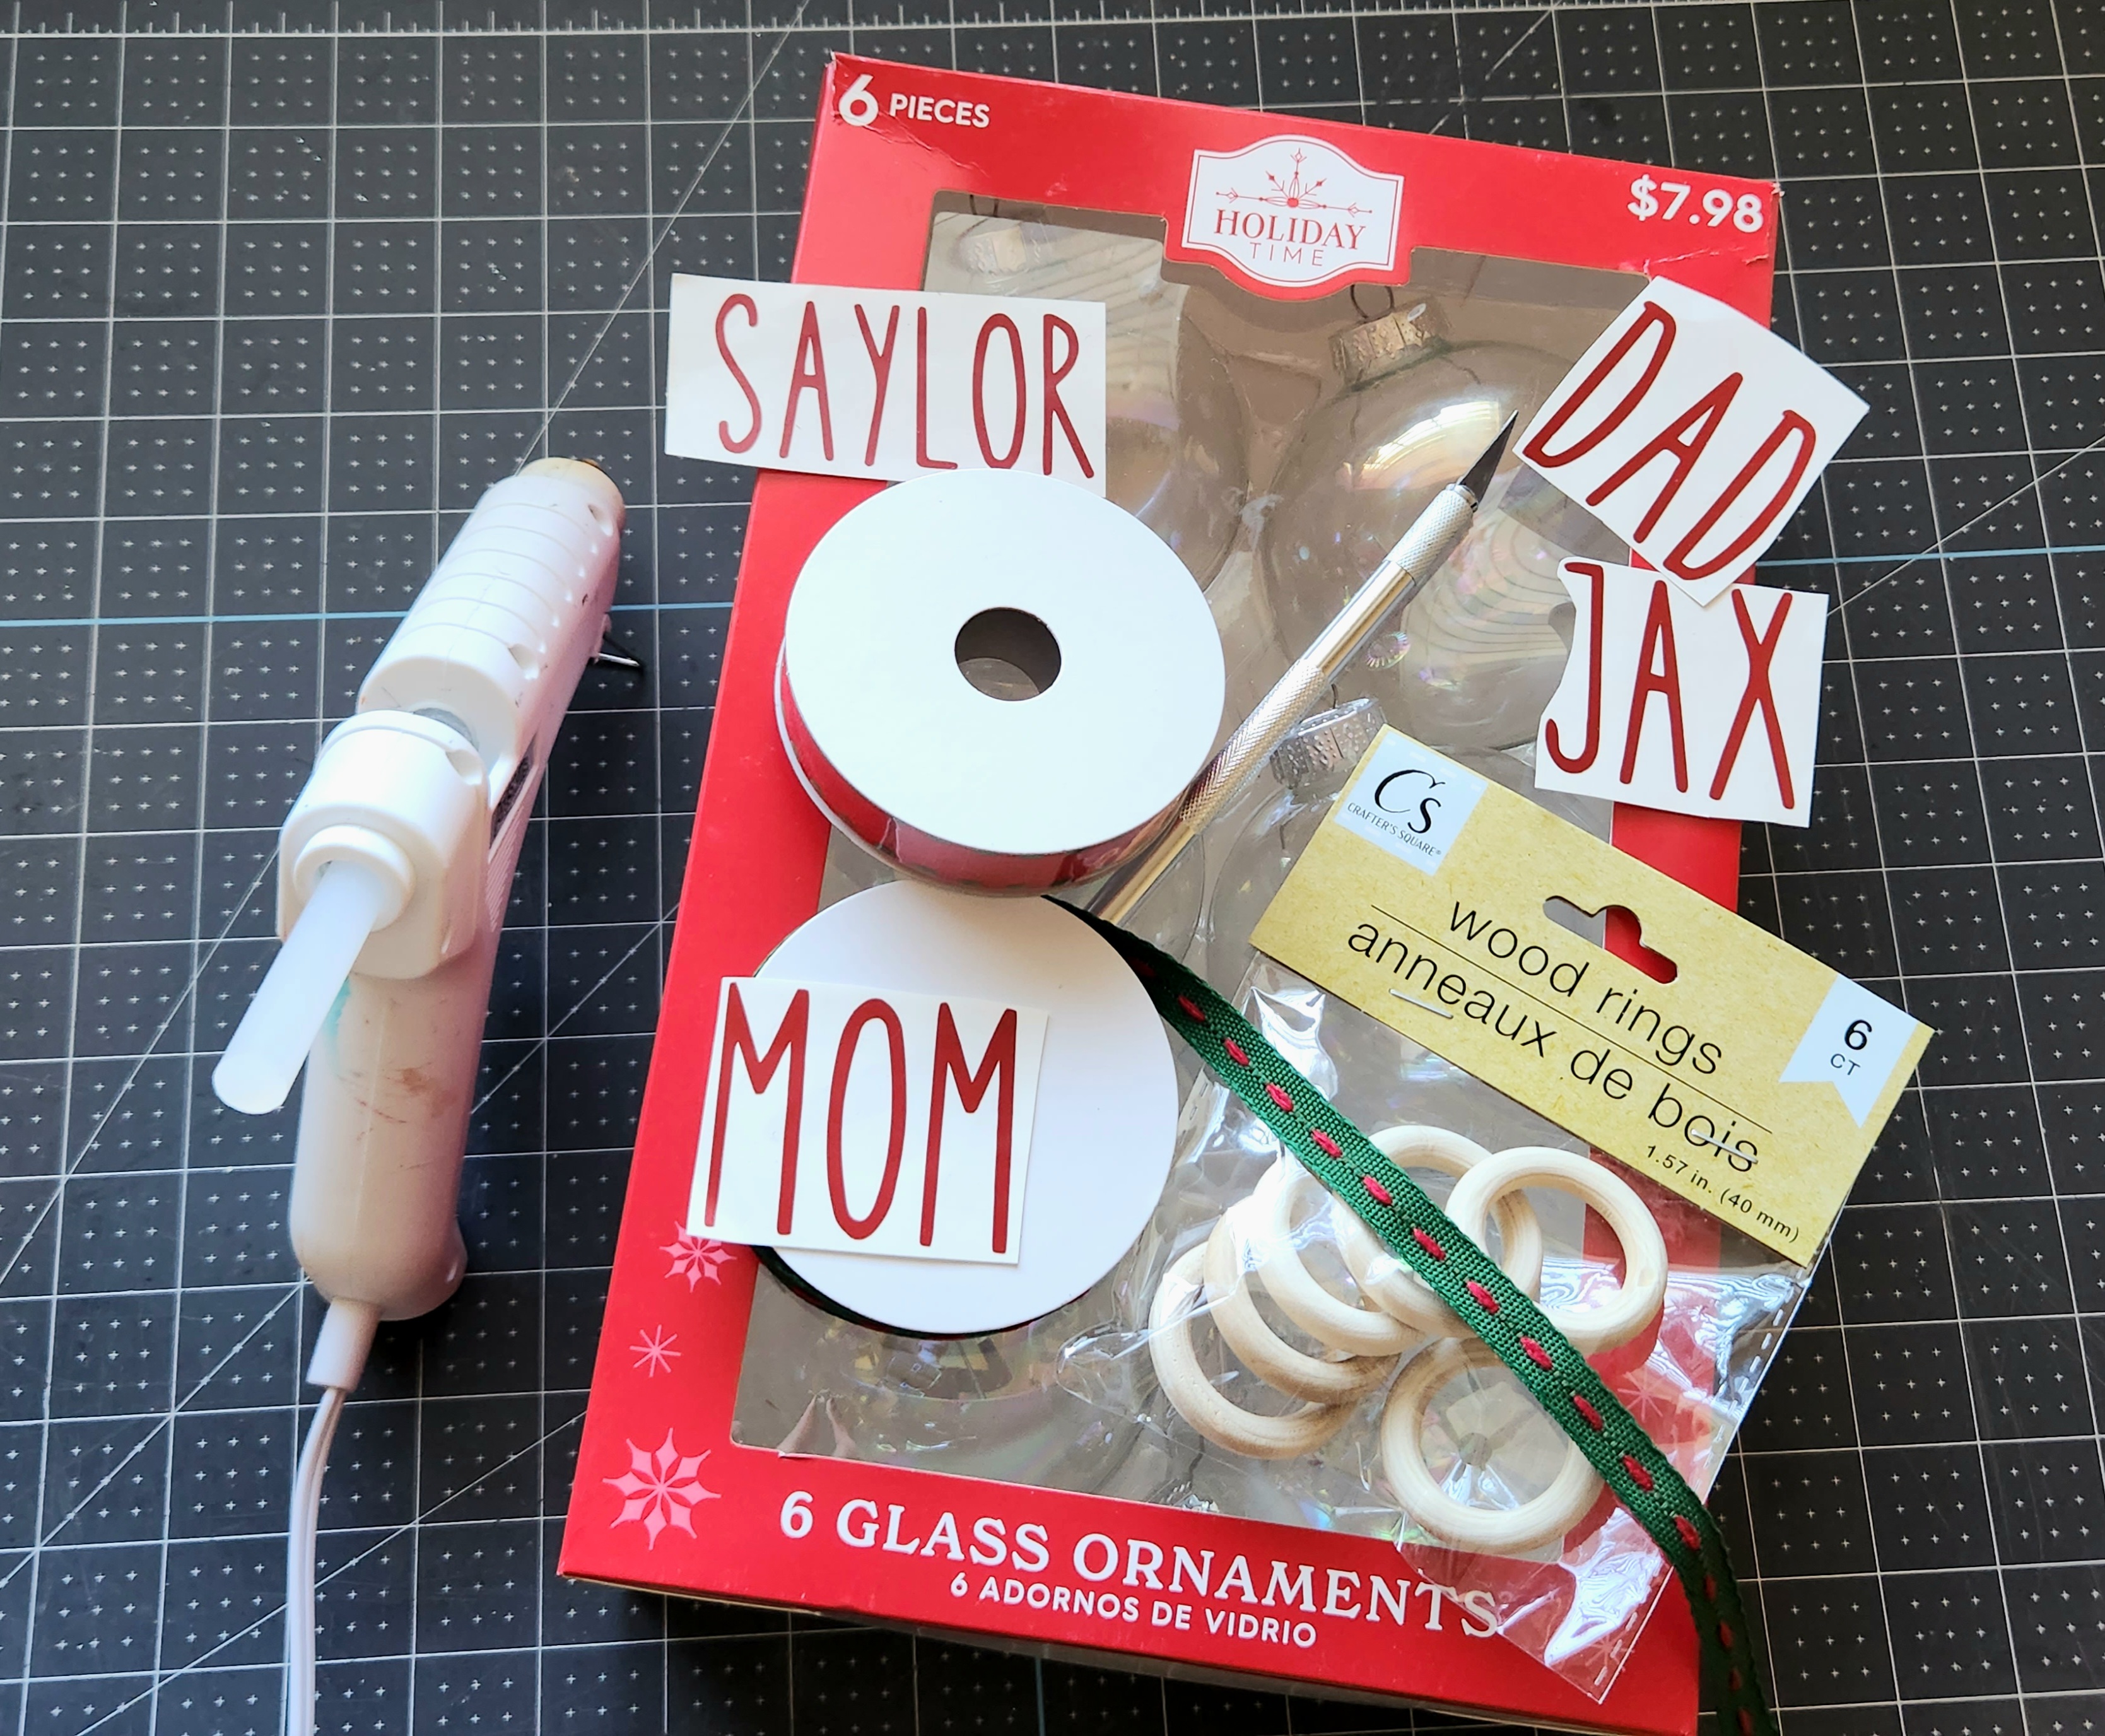 DIY ornament glass supplies: clear glass ornaments 6 pack, vinyl names, red and green ribbon, wood rings, exacto knife, and a hot glue gun with glue.